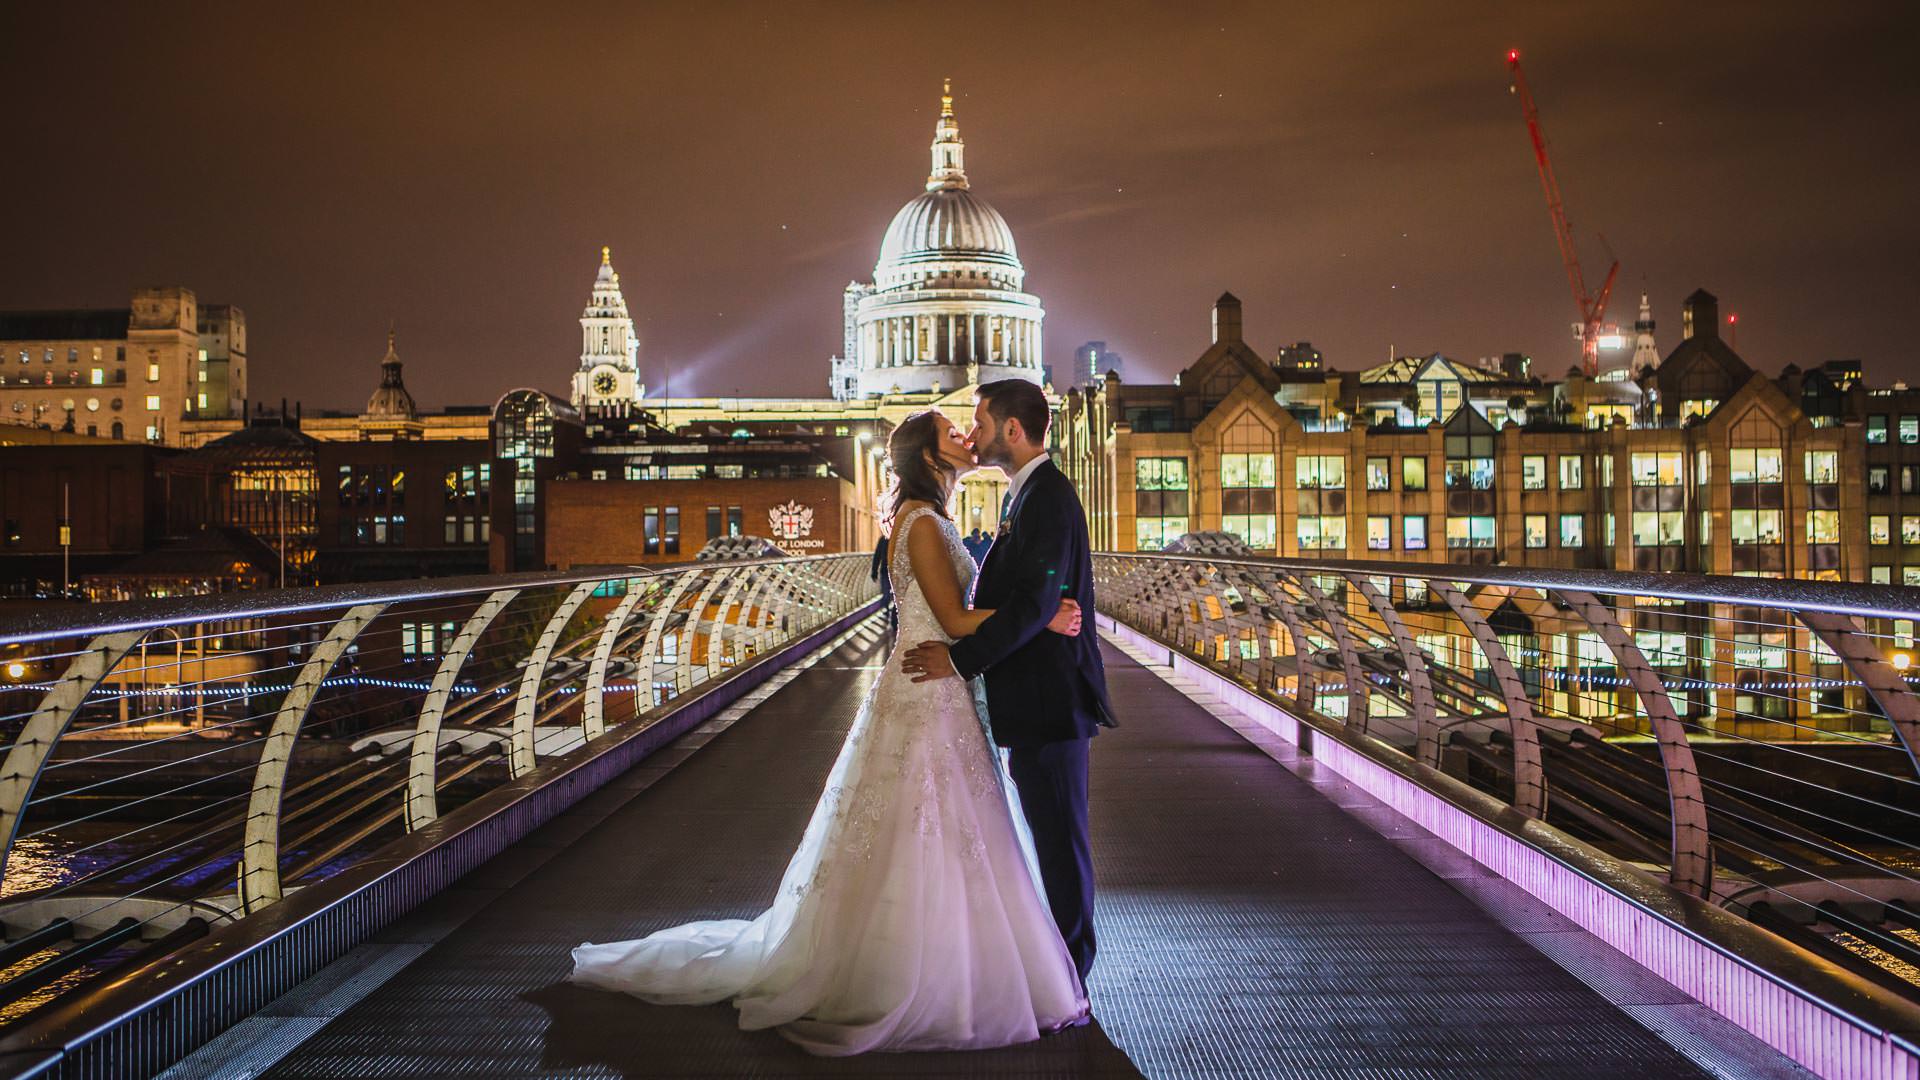 Stunning London location based wedding photography by Tierney Photography.